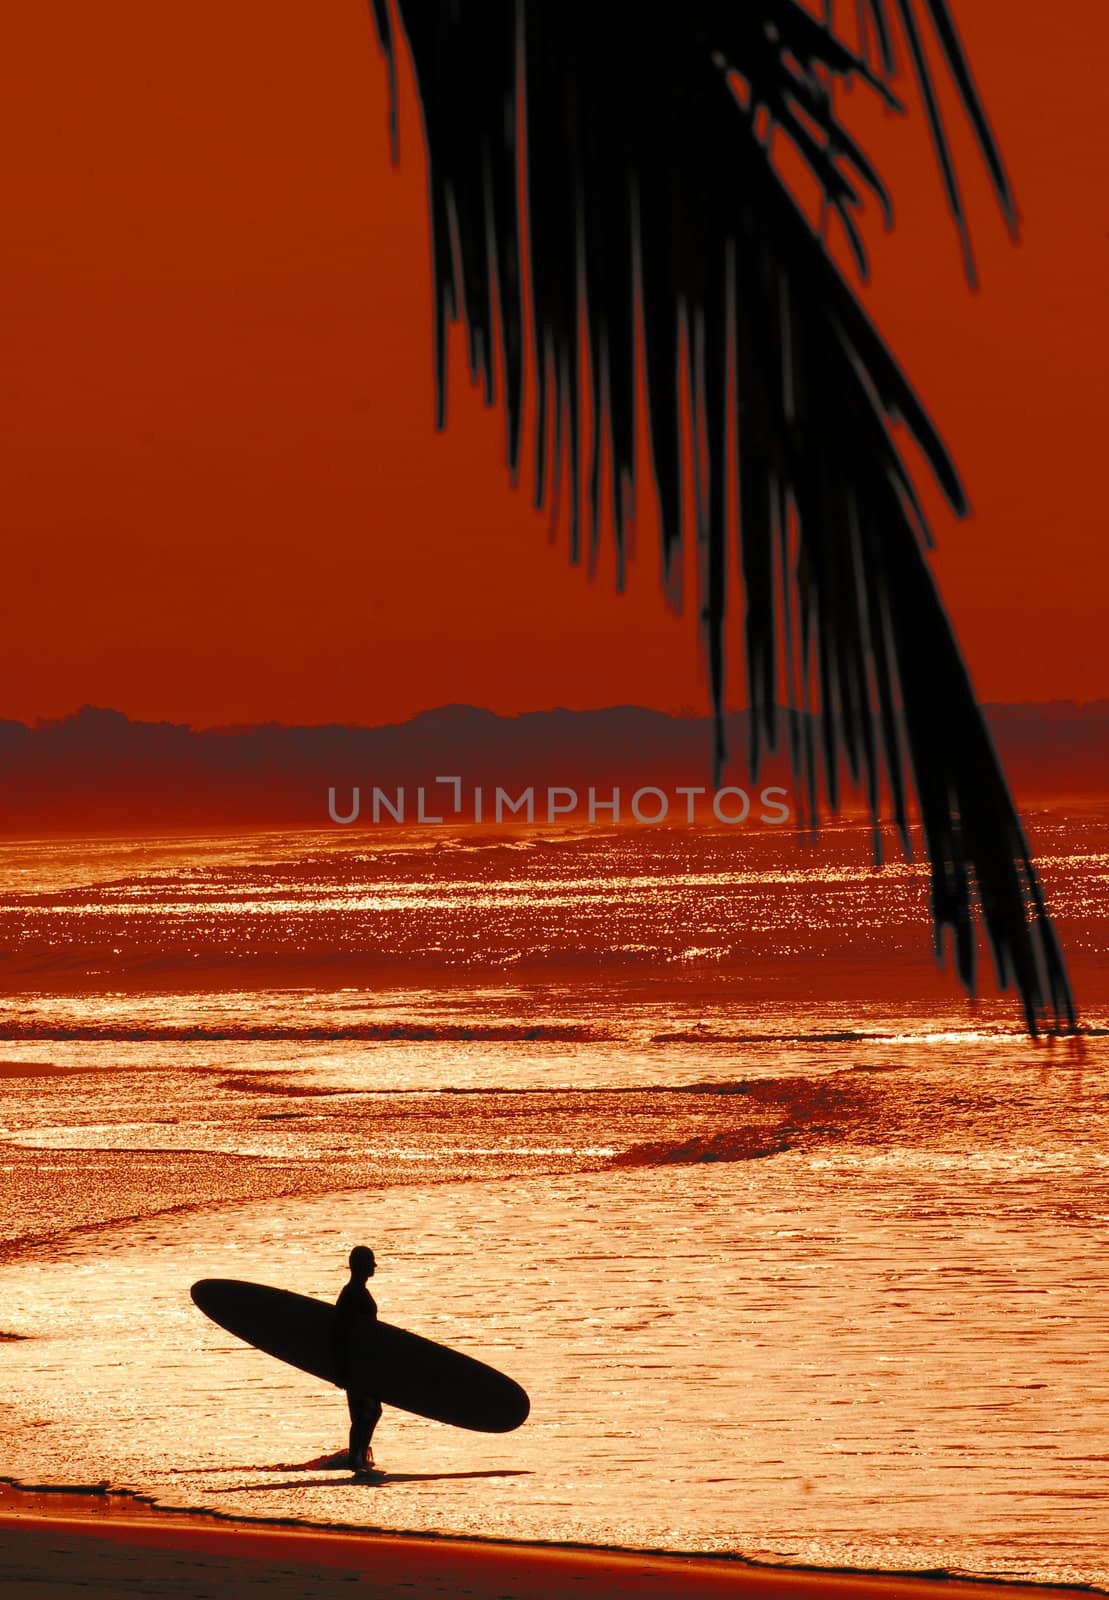 Surfer in tropical destination by ftlaudgirl